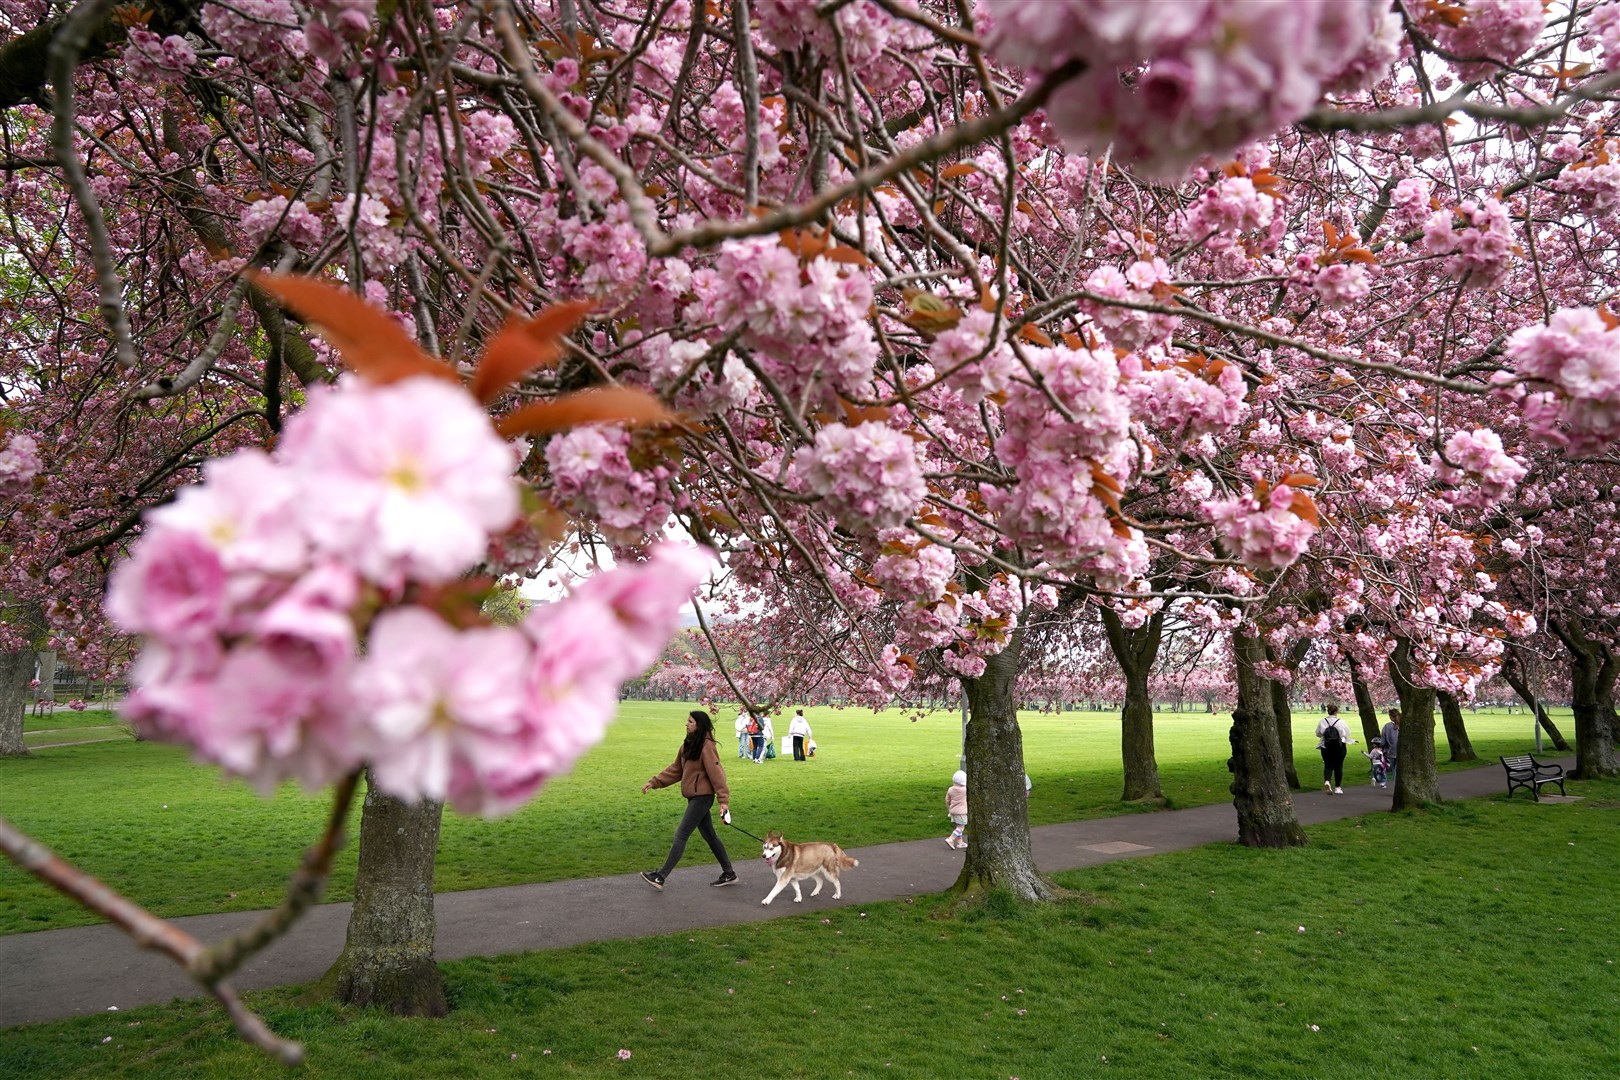 Members of the public walk past cherry blossom trees in full bloom in The Meadows in Edinburgh during fine April weather (Andrew Milligan/PA)